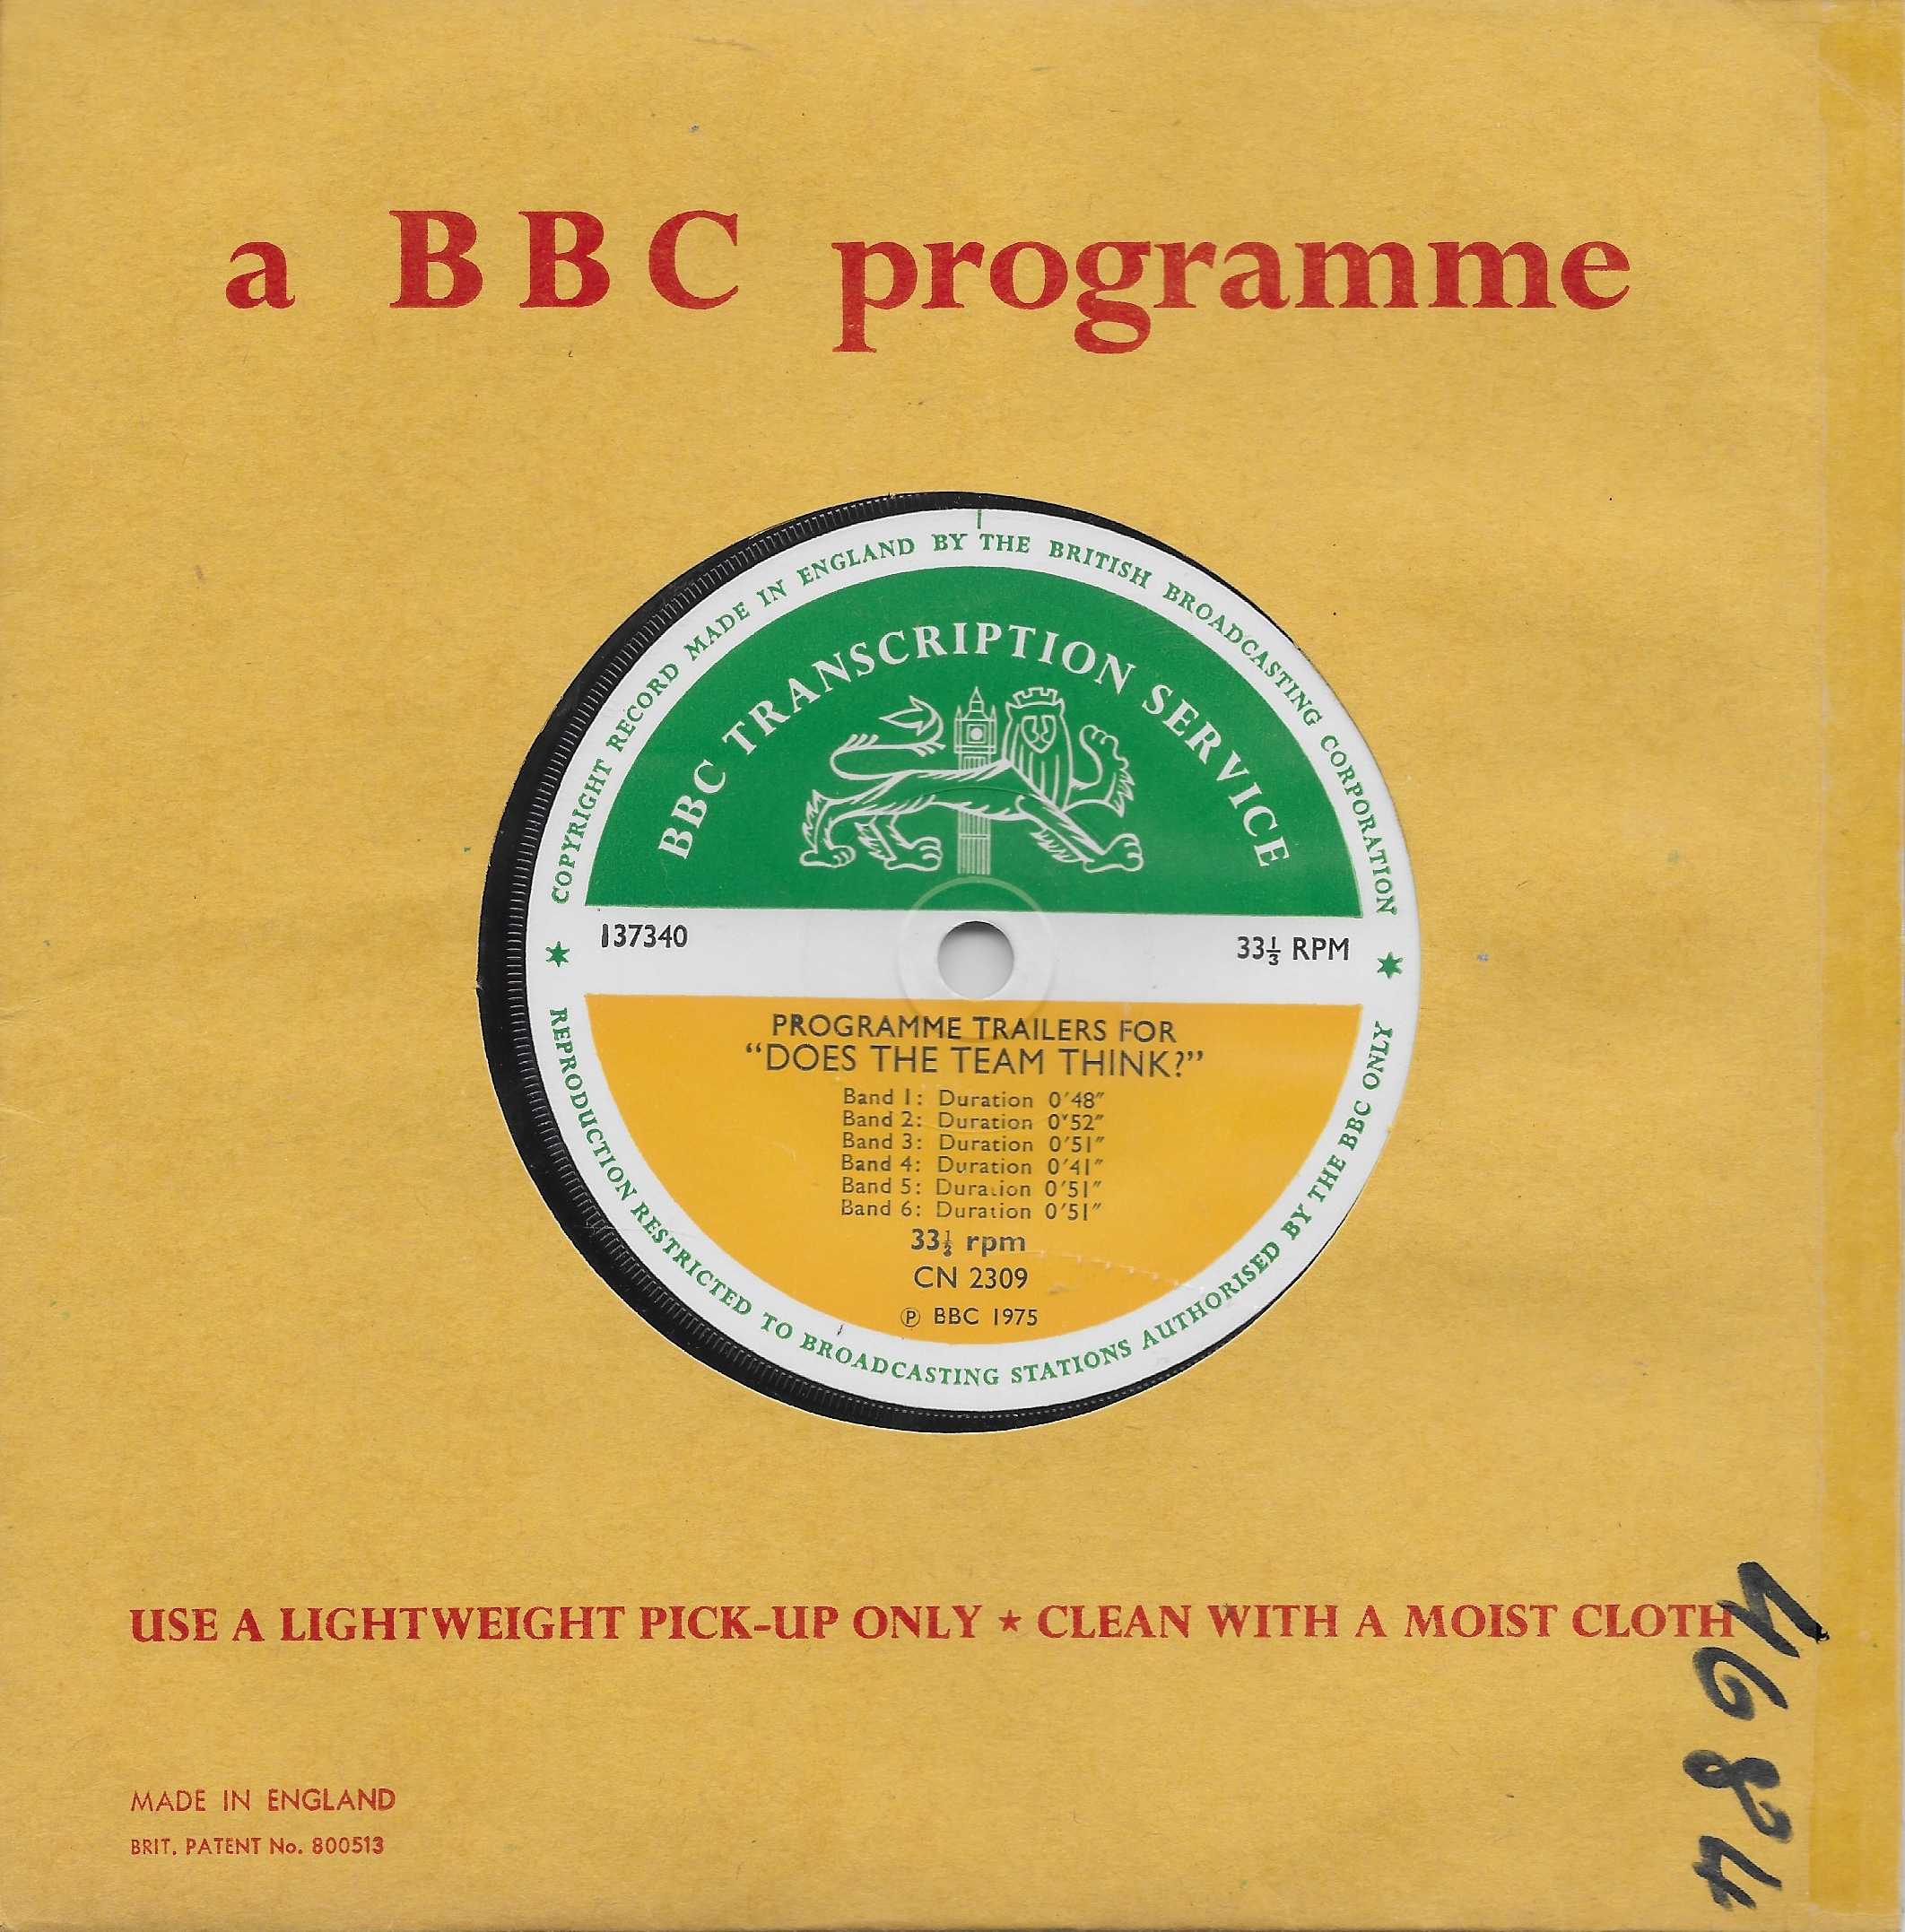 Picture of CN 2309 Programme trailers for "Does the team think?" by artist  from the BBC records and Tapes library